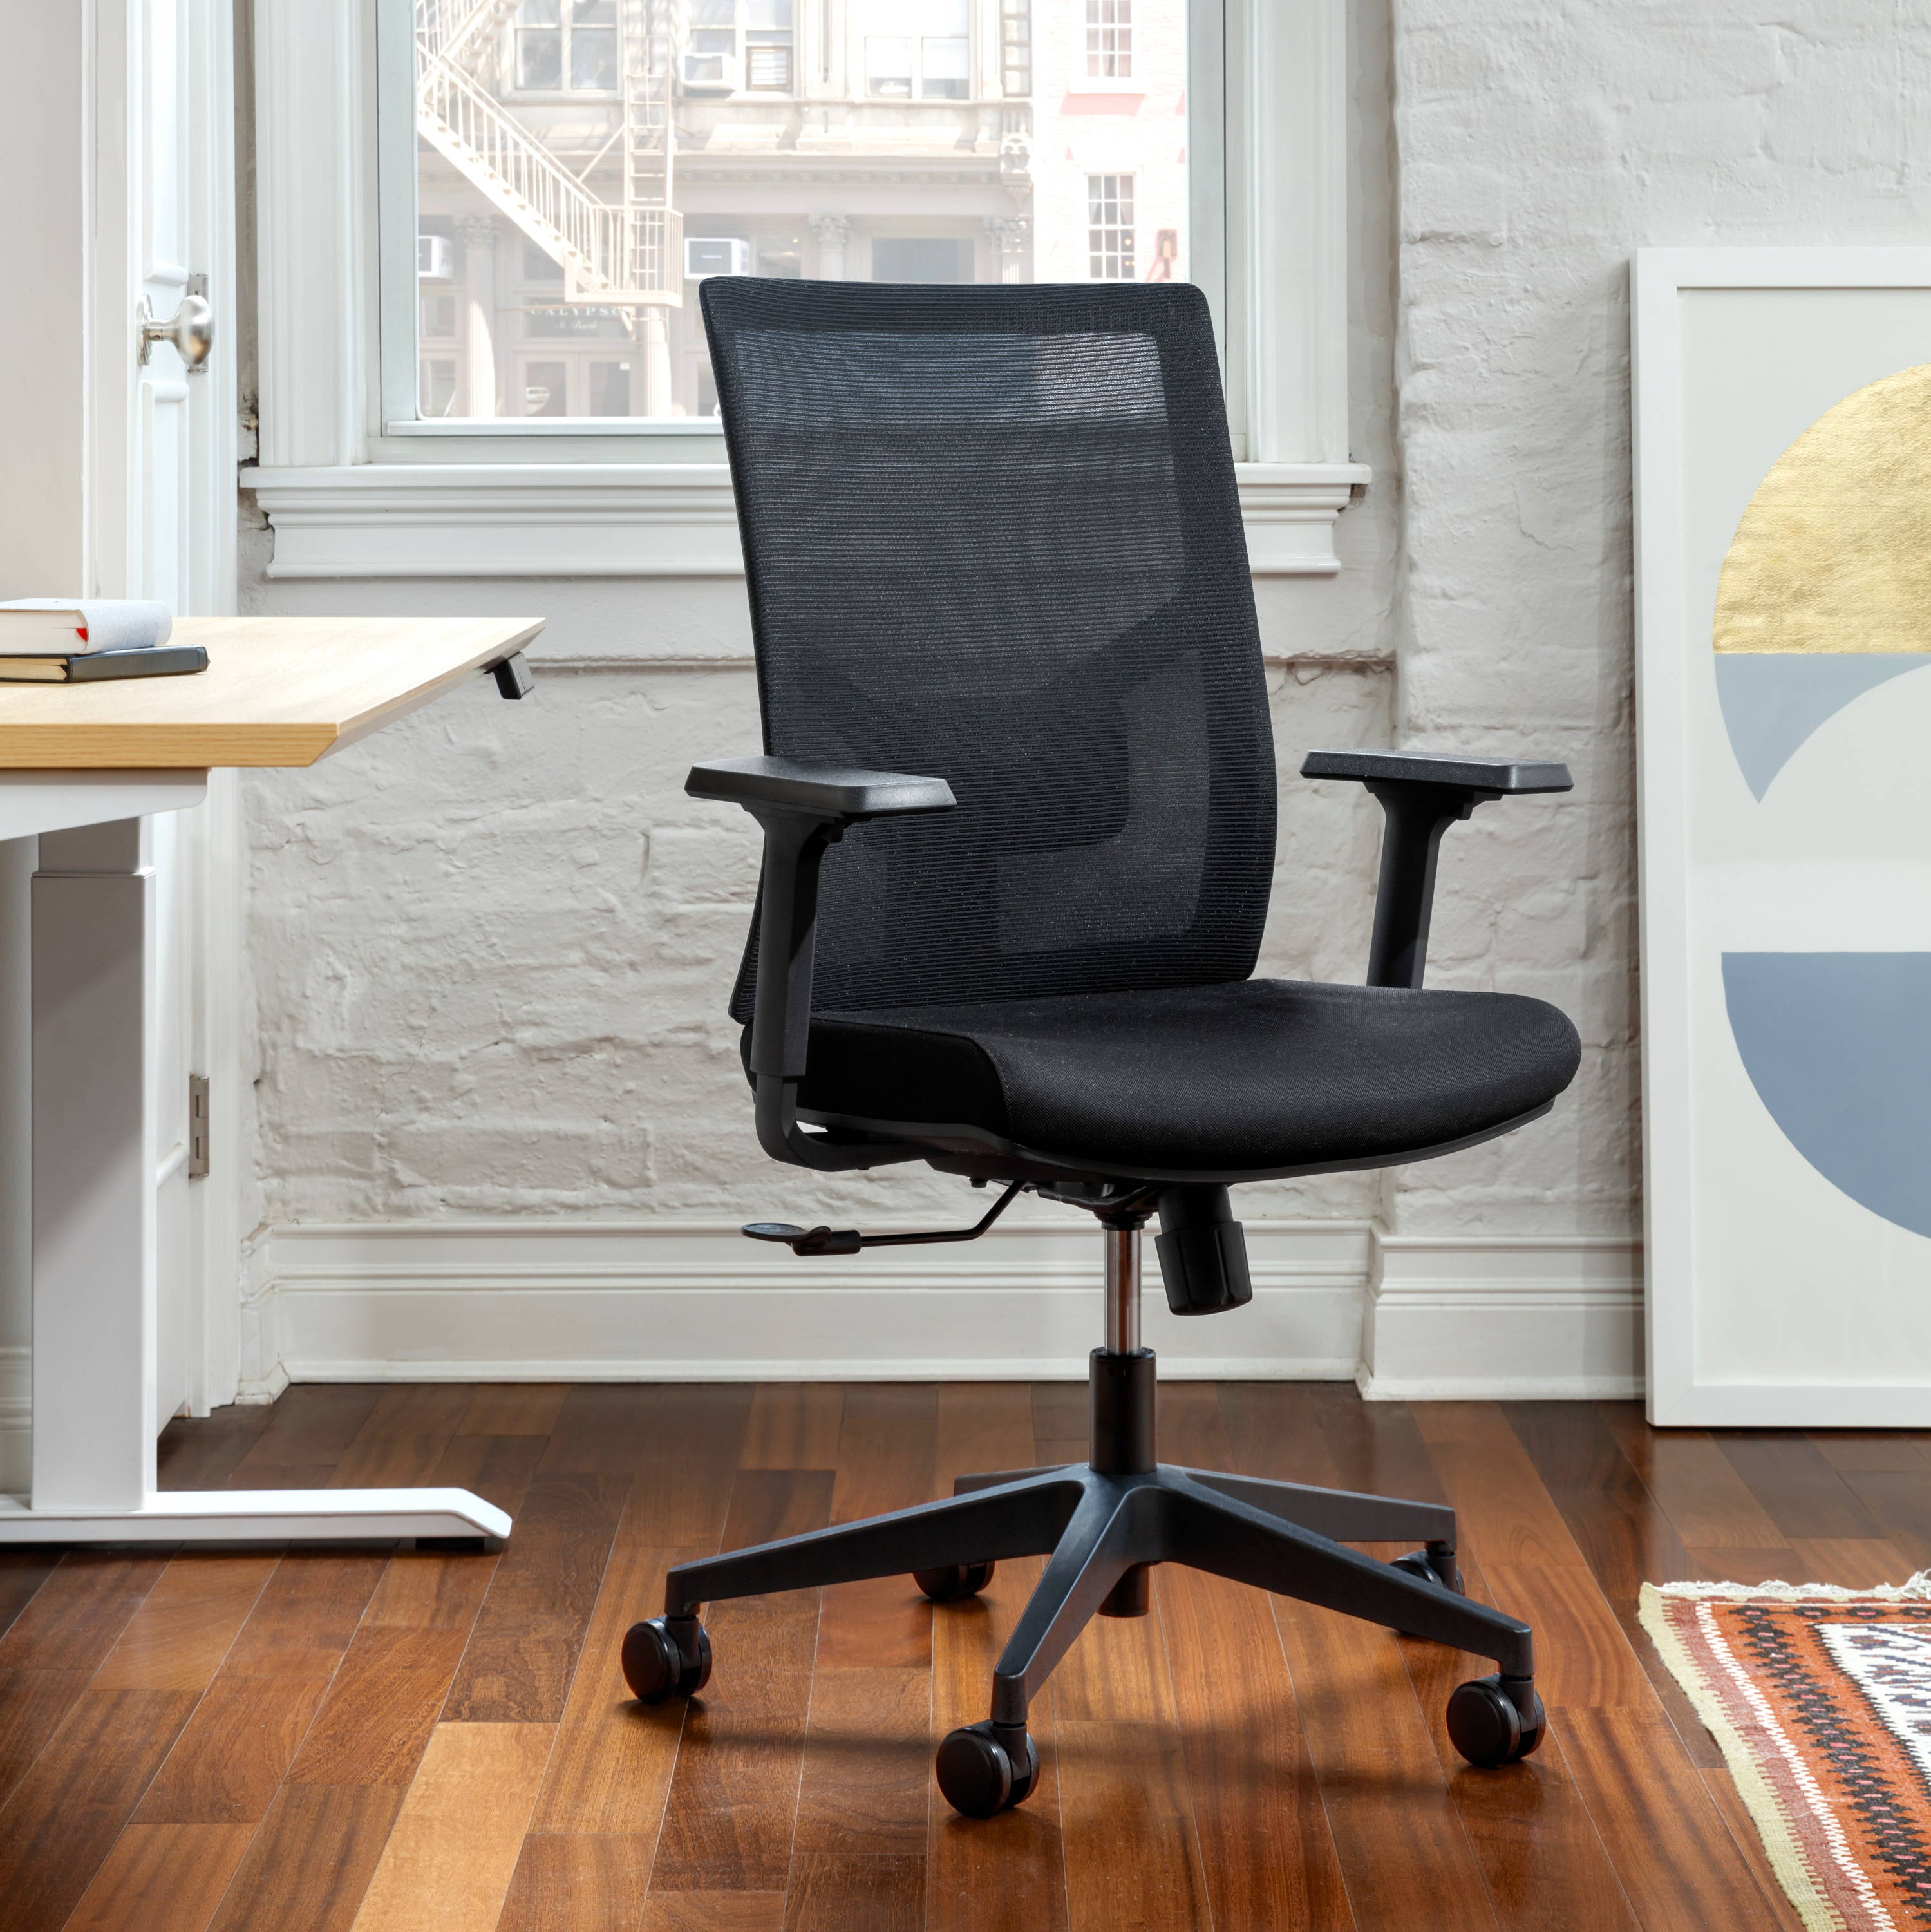 How to Find the Most Comfortable Office Chair for Long Hours